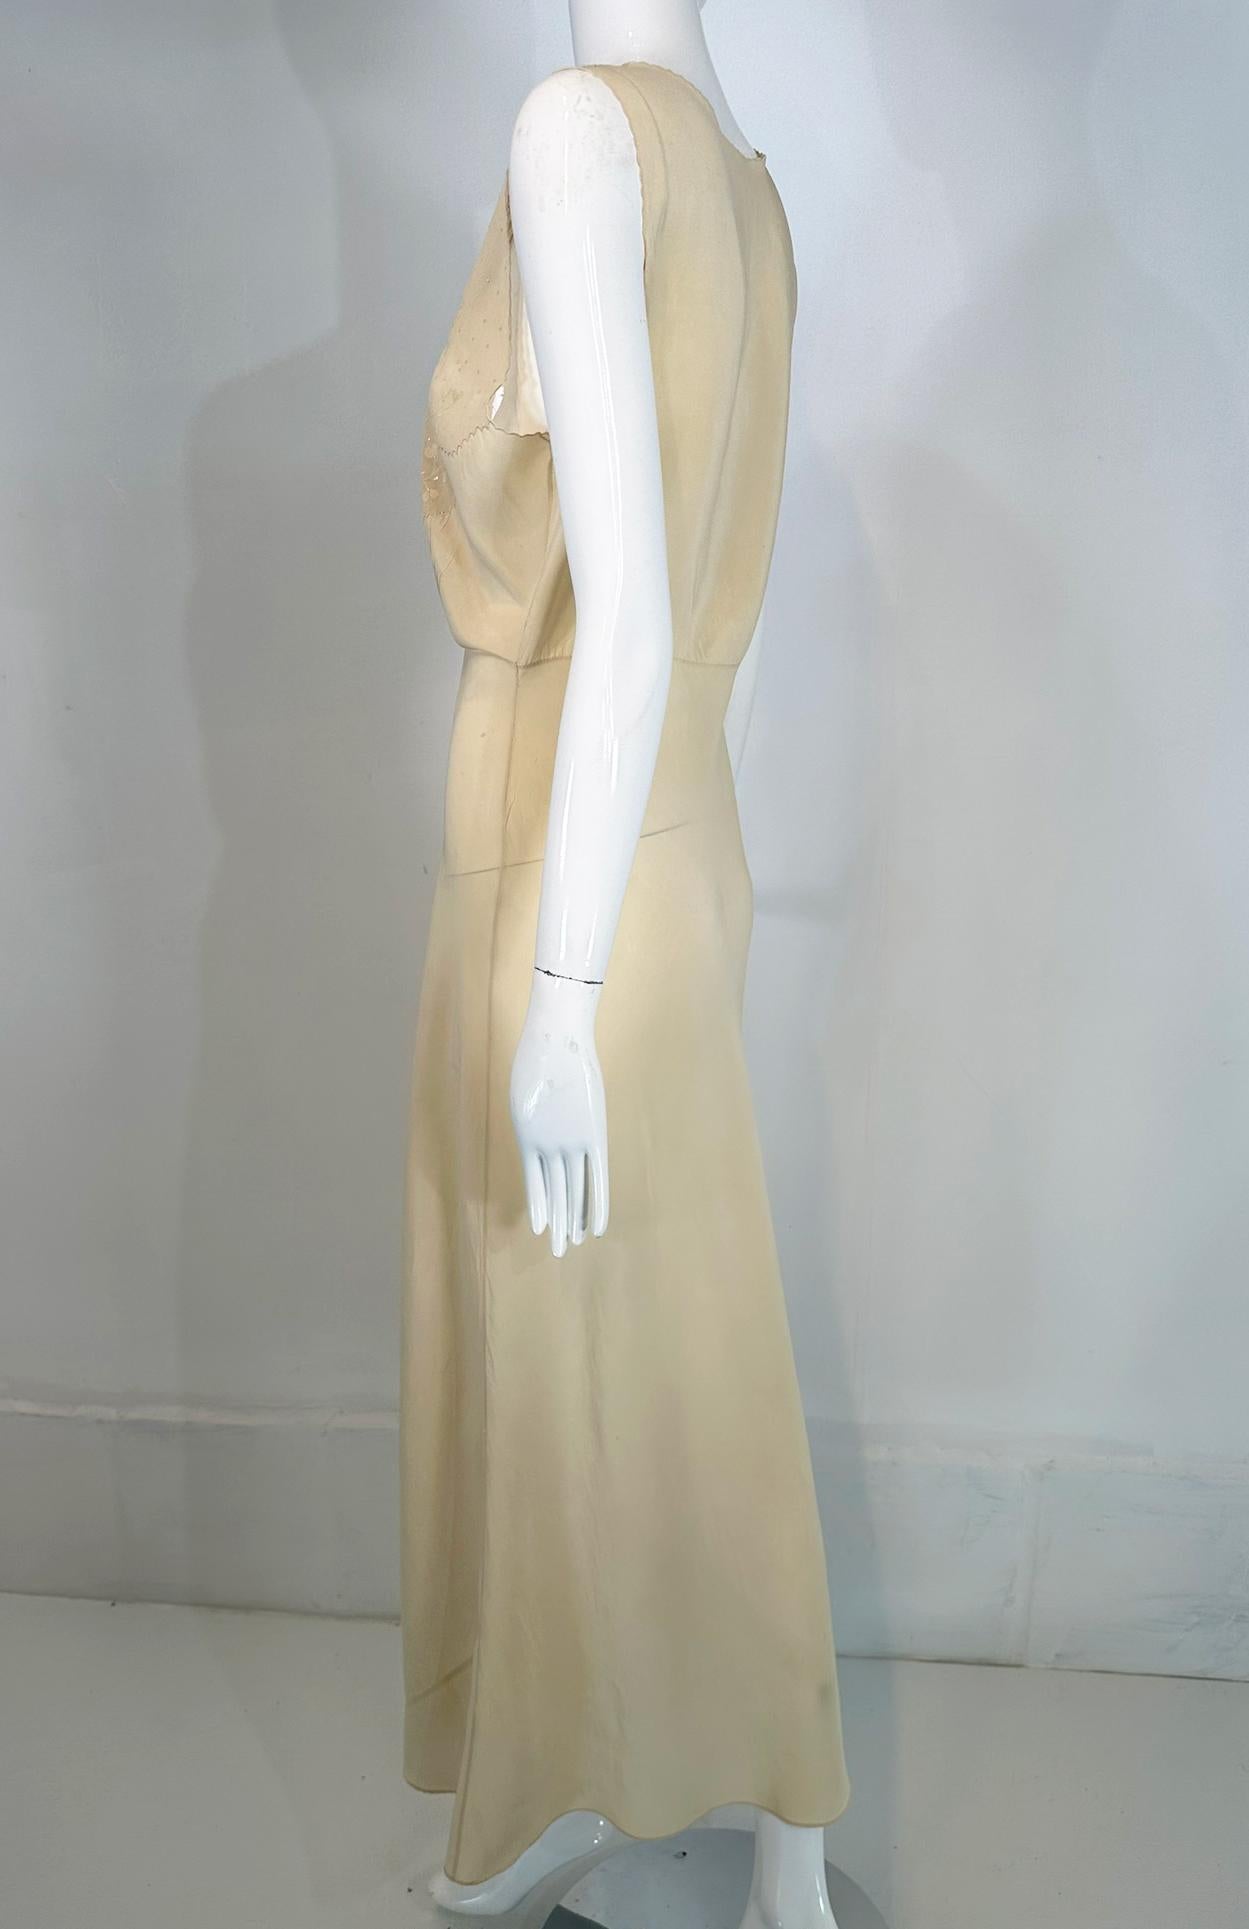 1930s Cream Bias Cut Sheer Silk Hand Embroidered & Appliqued Slip Dress Gown For Sale 7